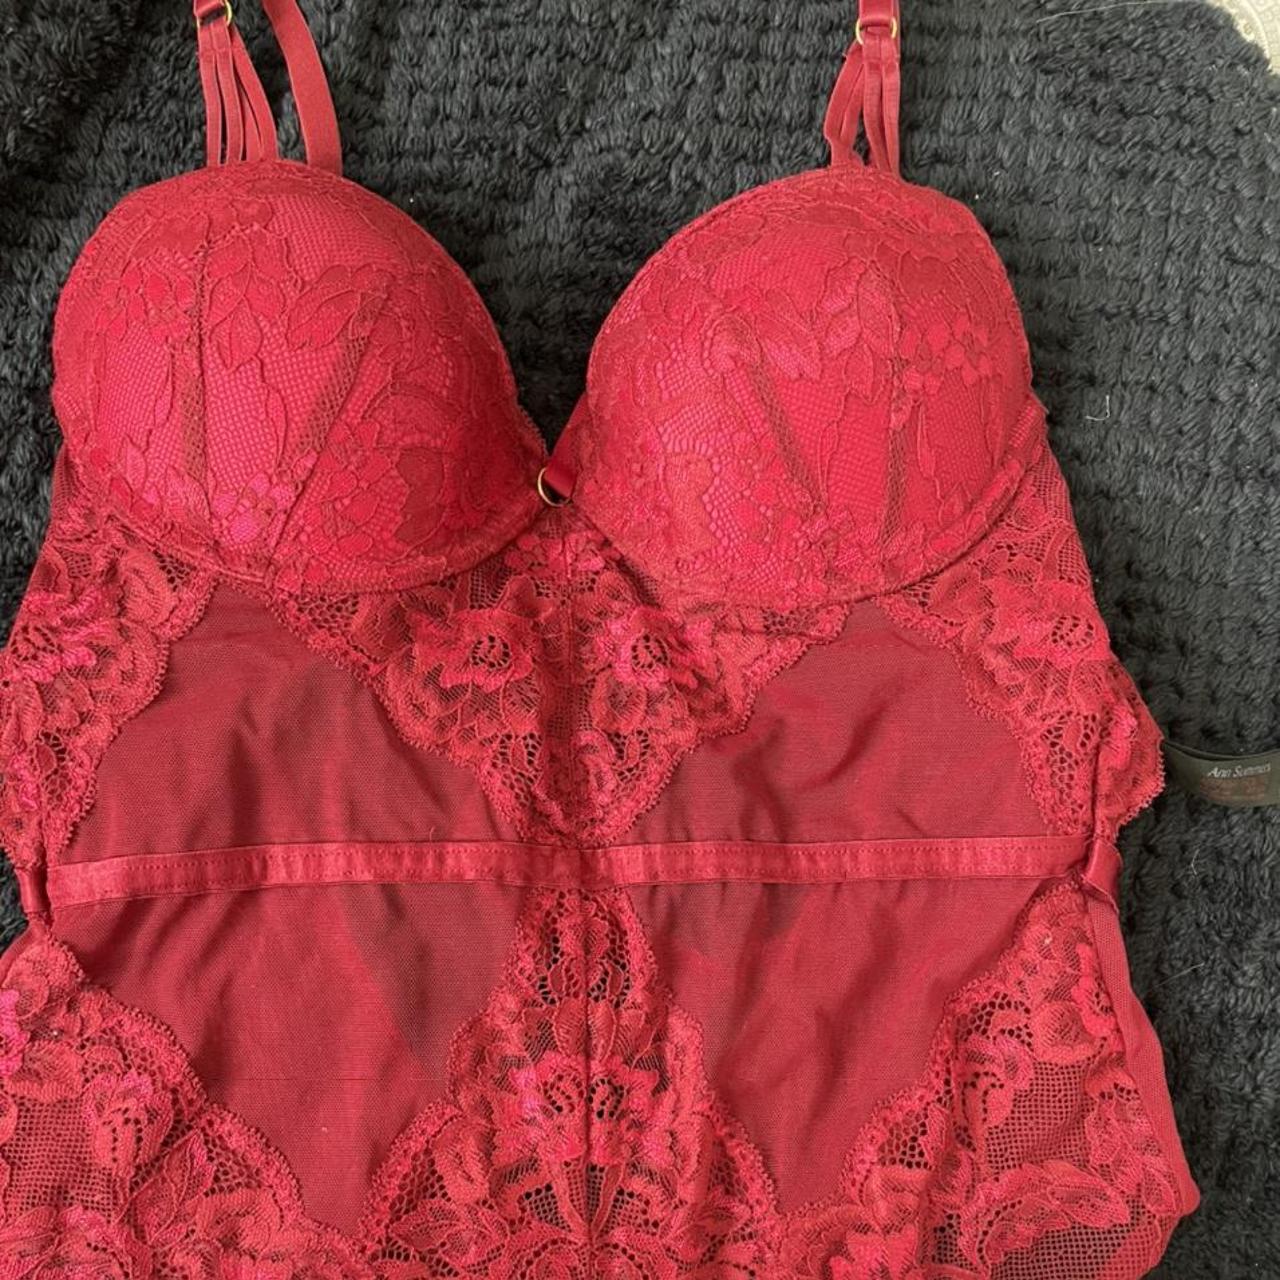 Ann Summers red lace lingerie bodysuit - size small... - Depop